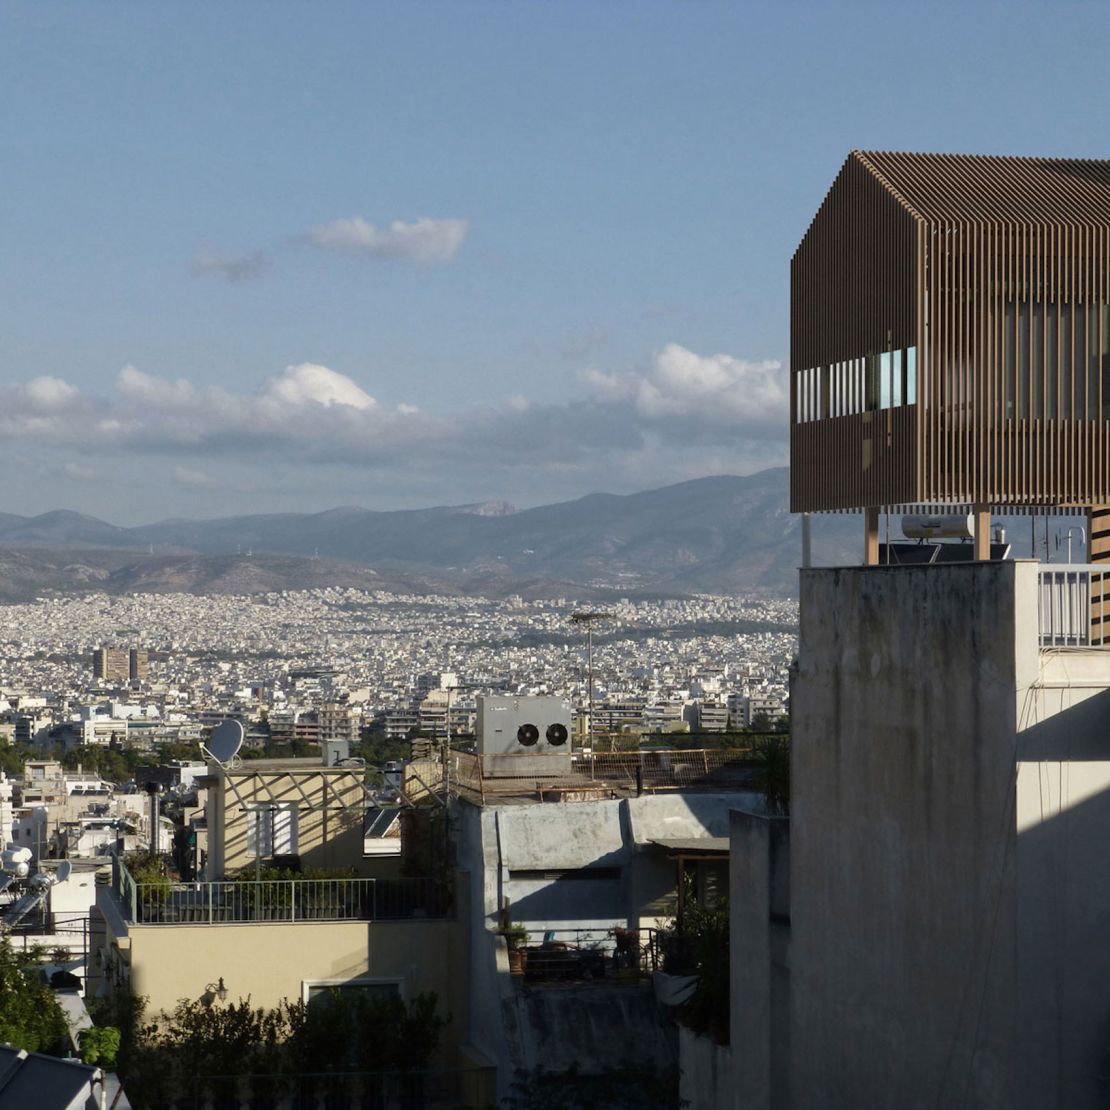 A rooftop attachment designed by Panos Dragonas and Varvara Christopoulou, shown in this rendering with Athens as a background.